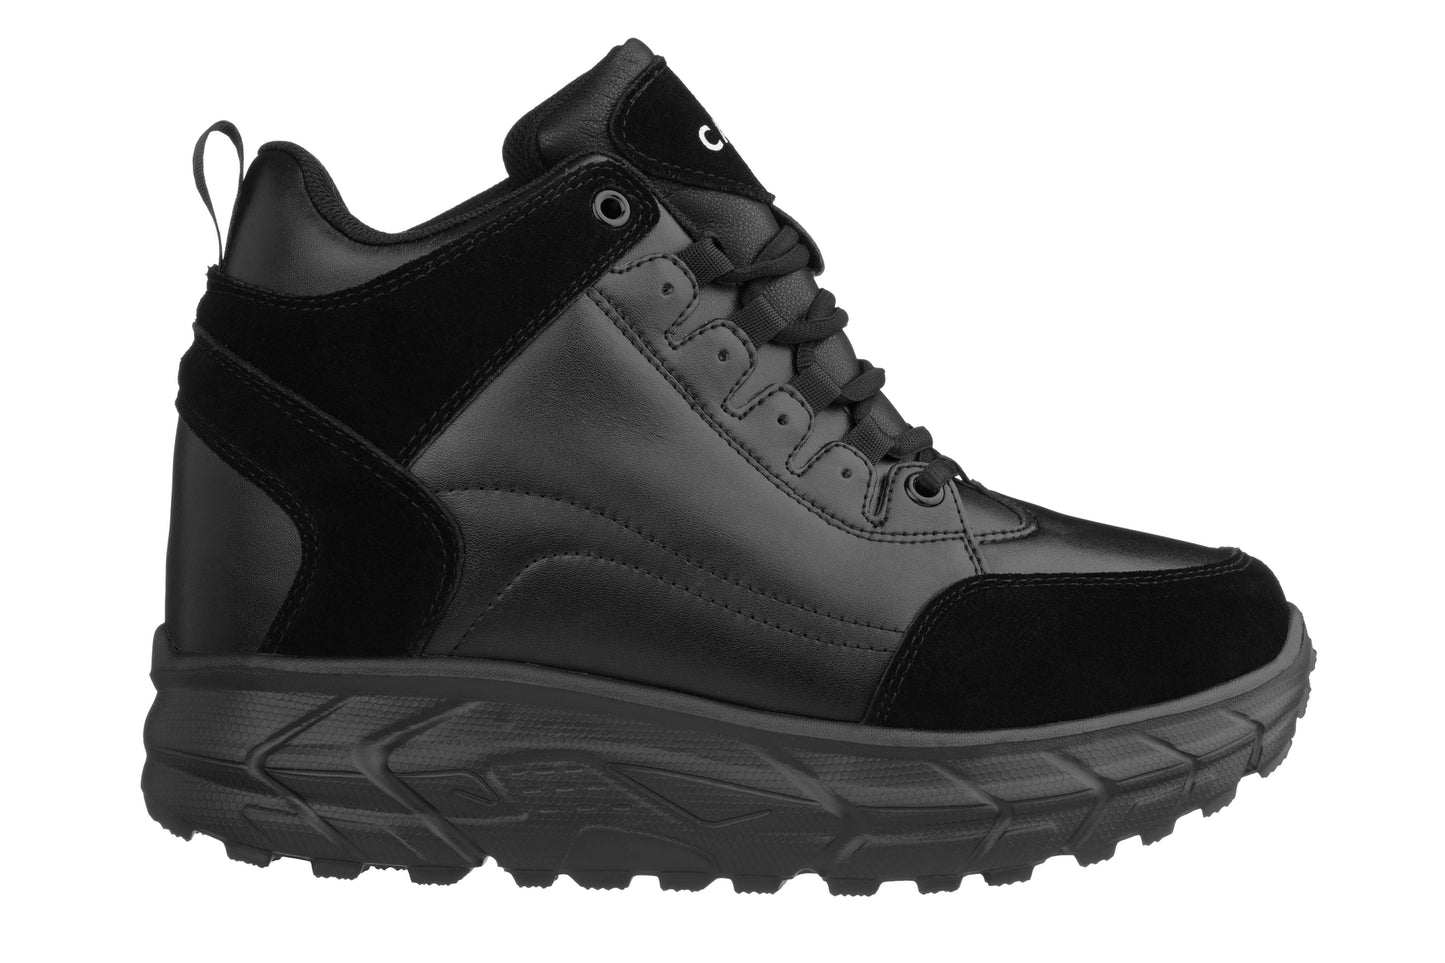 Elevator shoes height increase CALTO - S22797 - 4 Inches Taller (Black) - Hiking Style Boots